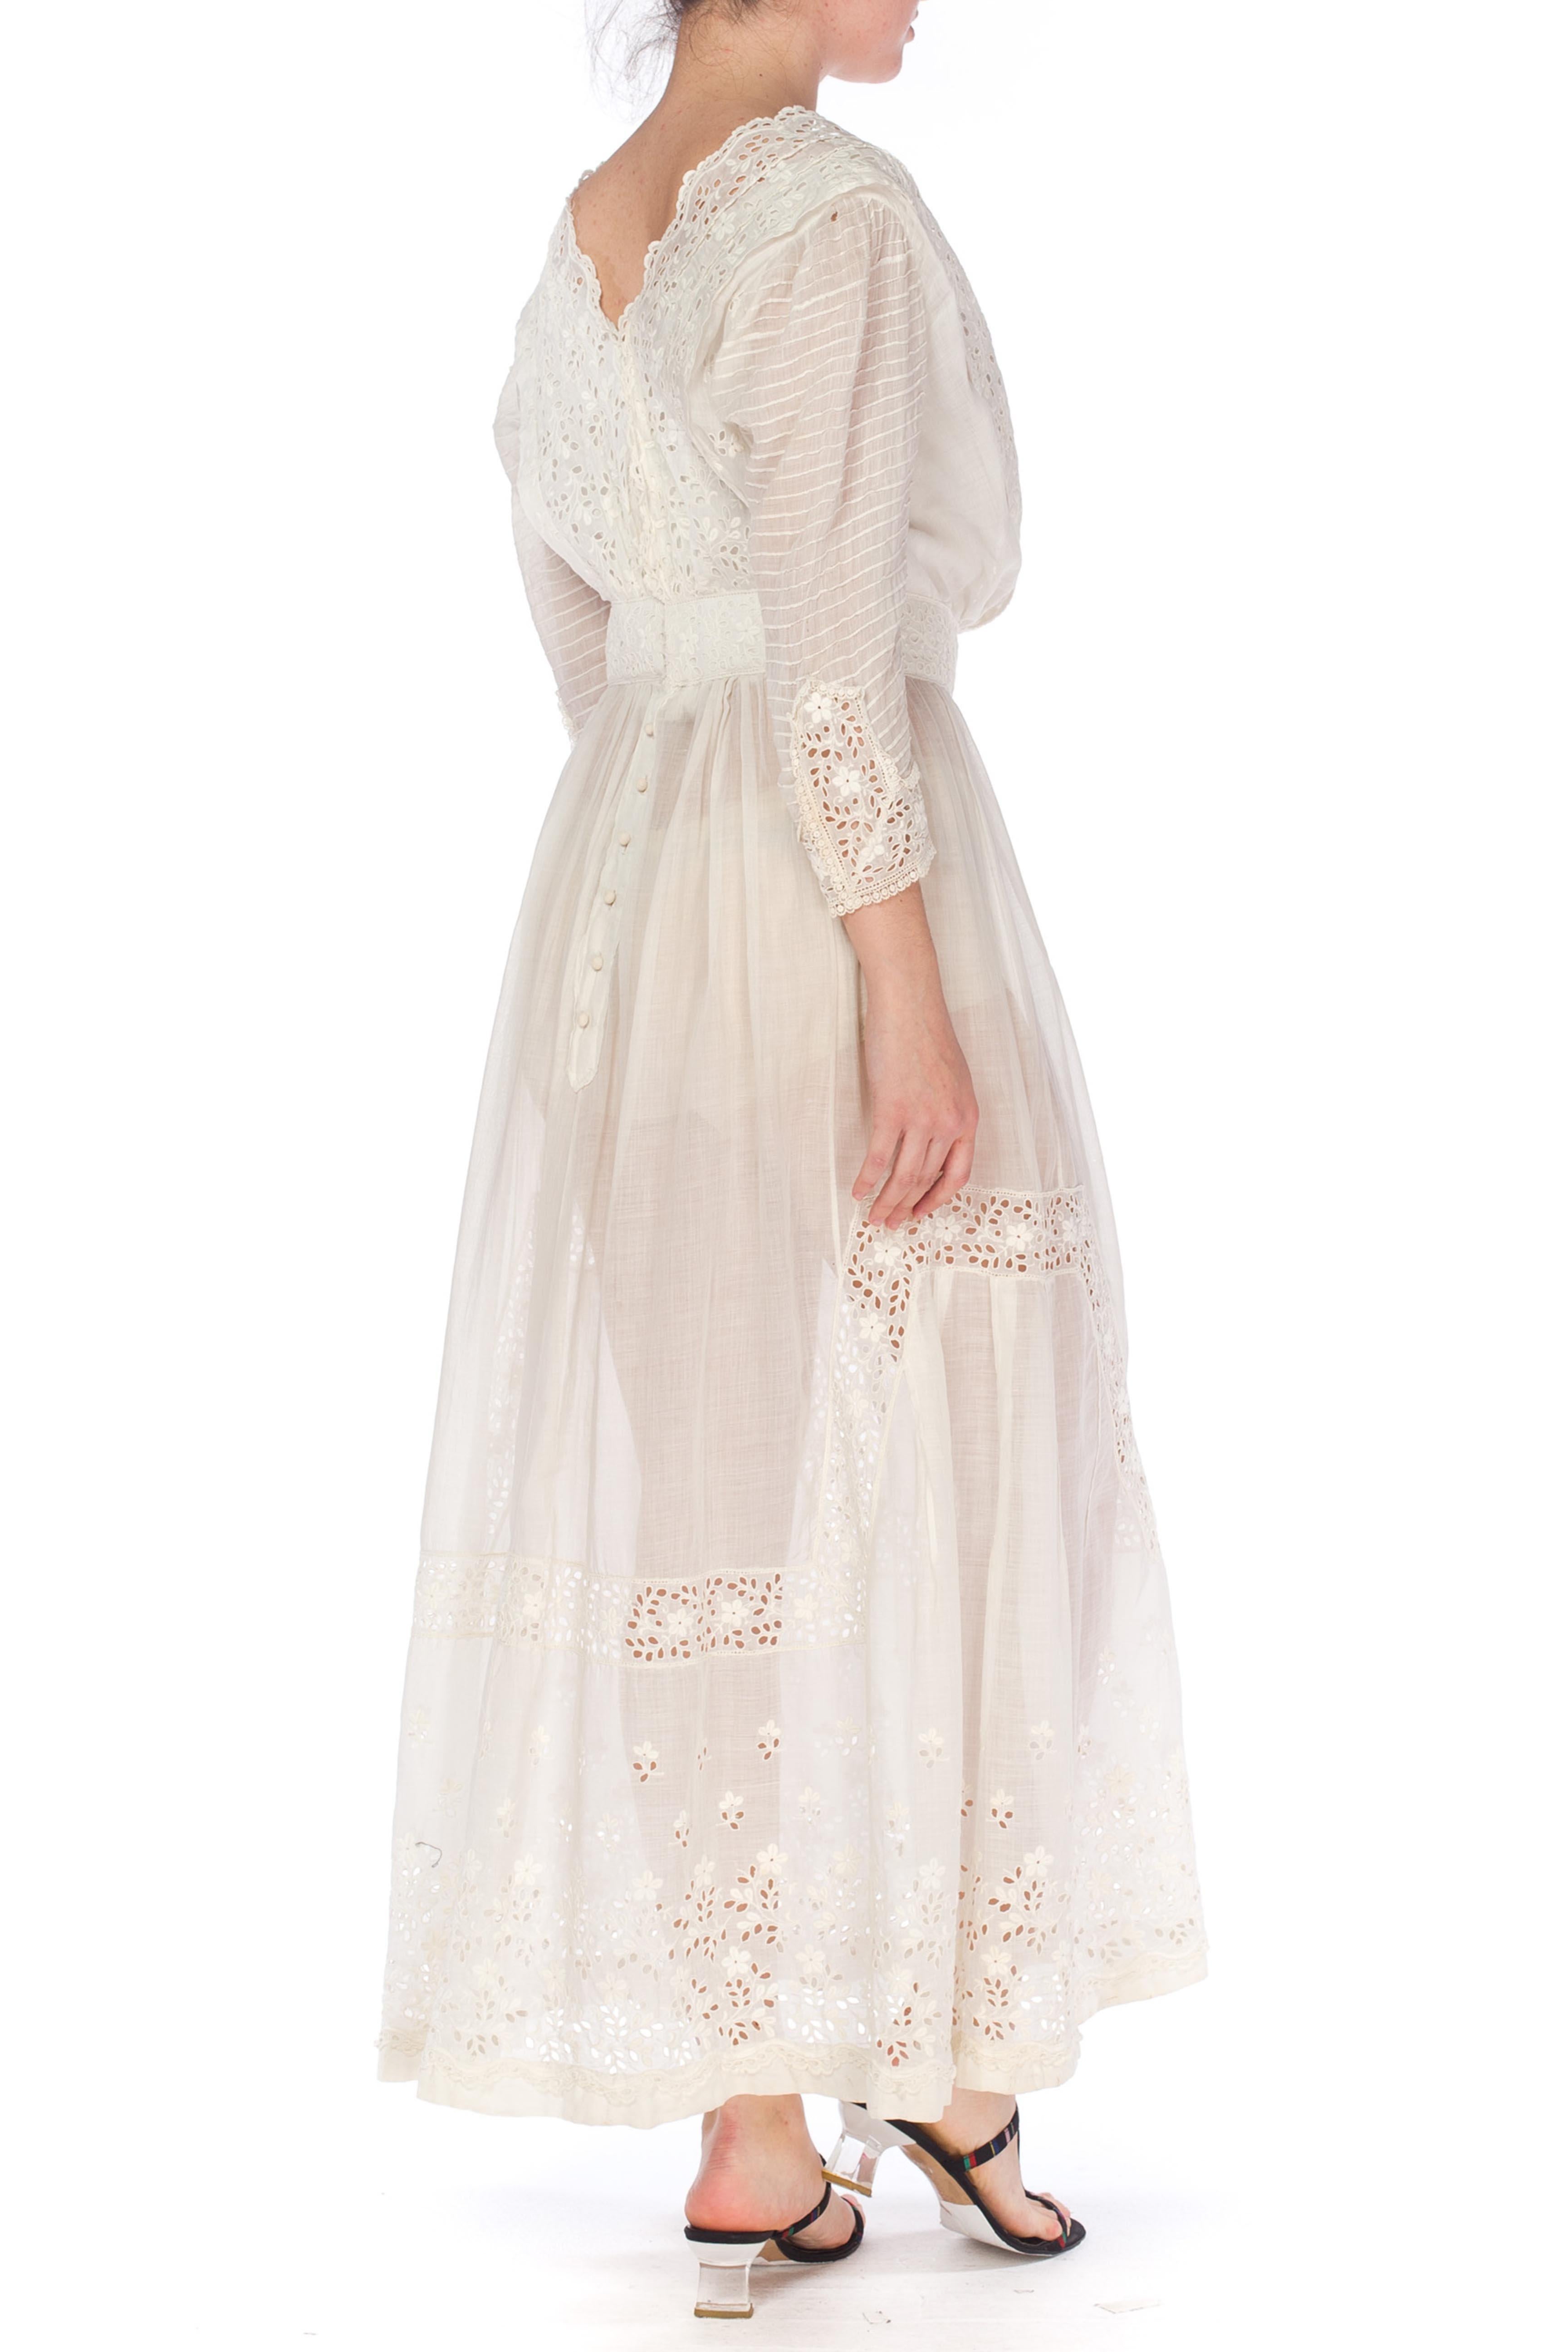 1900S White Cotton Lawn & Edwardian Eyelet Lace Dress With Pintucked Sleeves In Excellent Condition For Sale In New York, NY